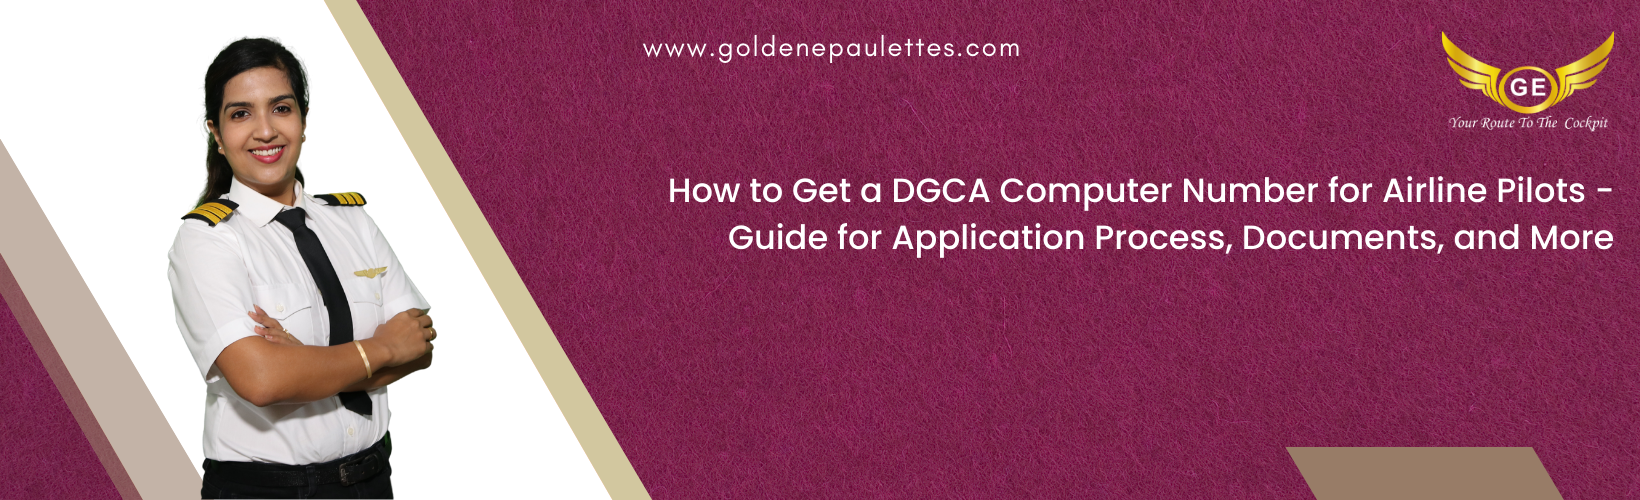 How to Quickly and Easily Obtain a DGCA Computer Number for Airline Pilots